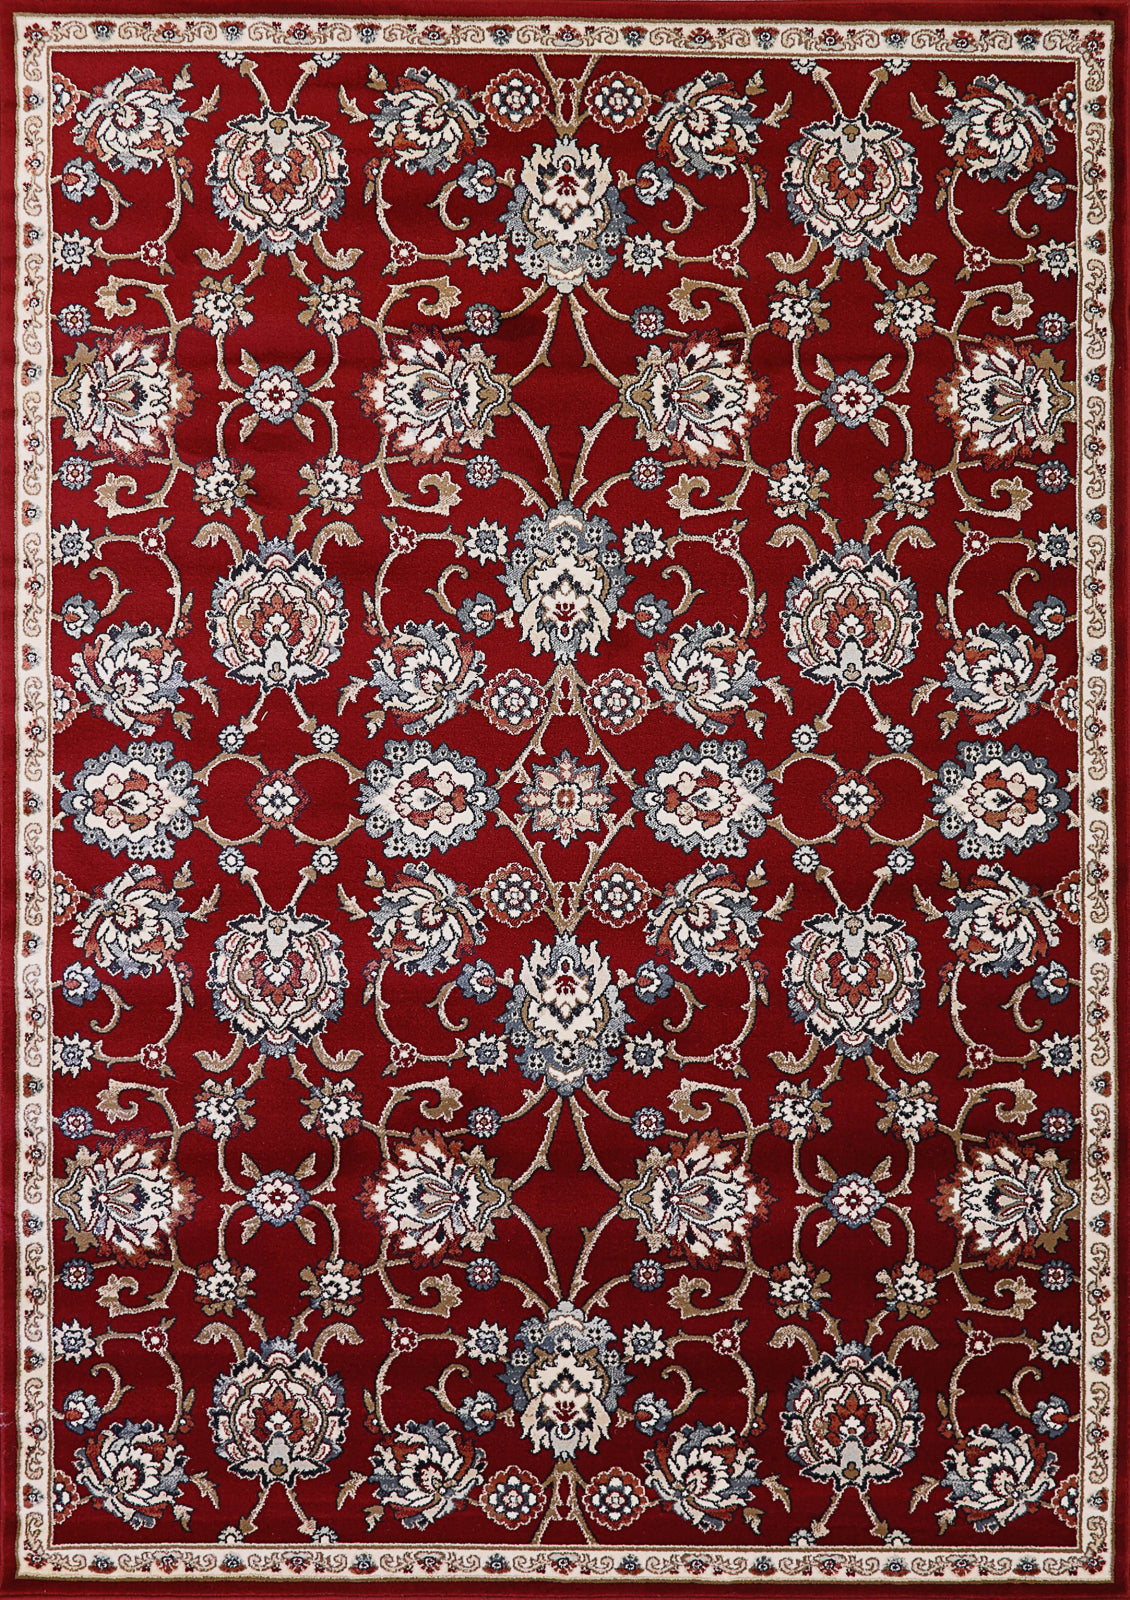 Dynamic Rugs Melody 985020 Red Area Rug main image